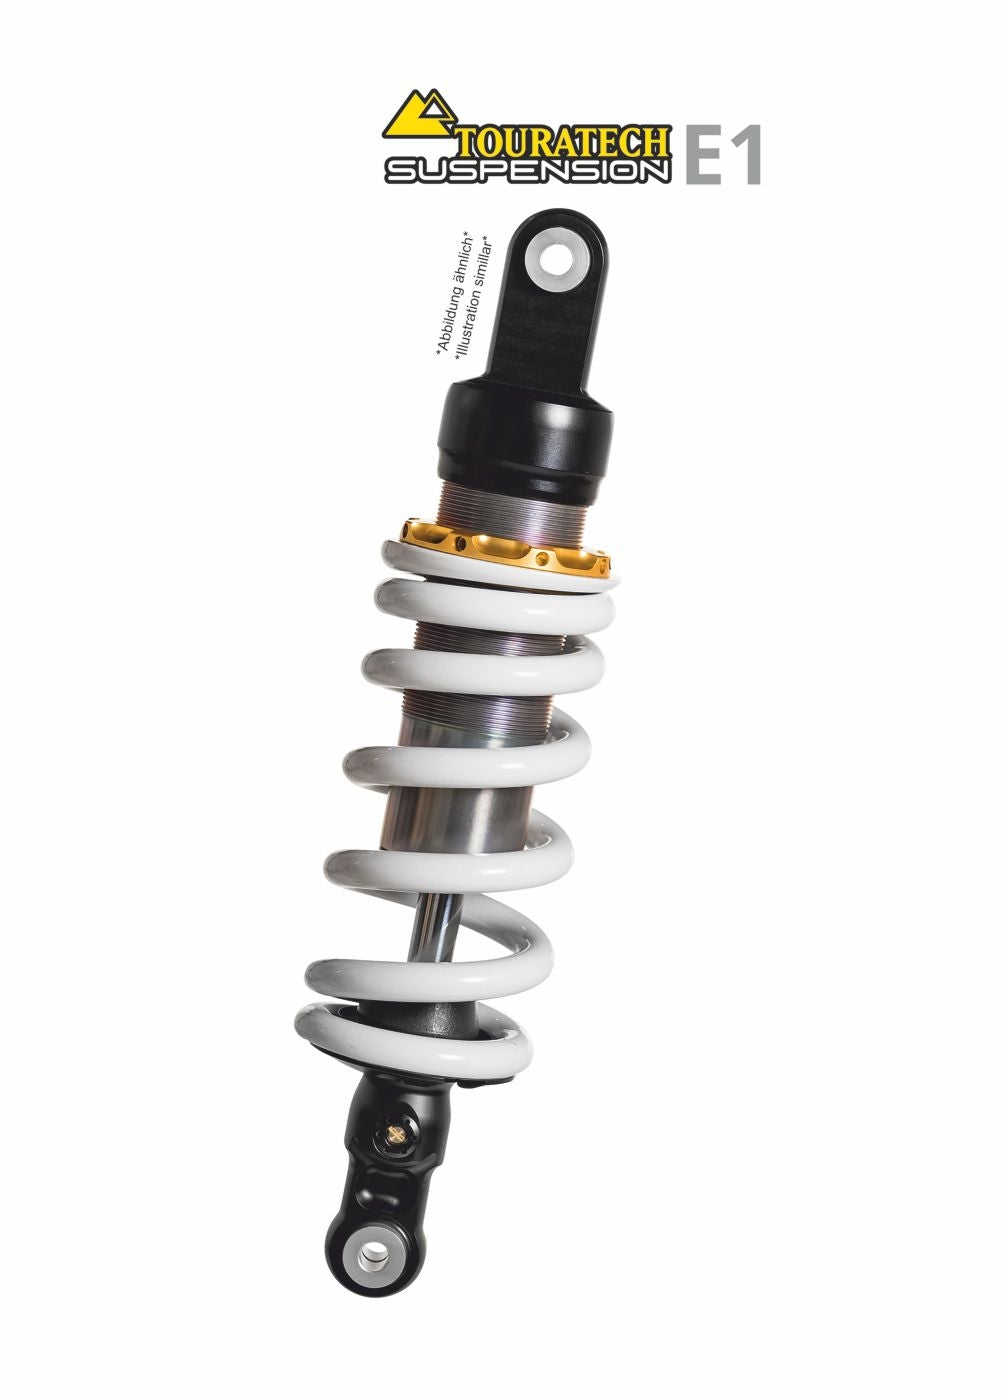 Touratech Suspension E1 shock absorber for BMW R 1150 R Rear 2001 - 2006